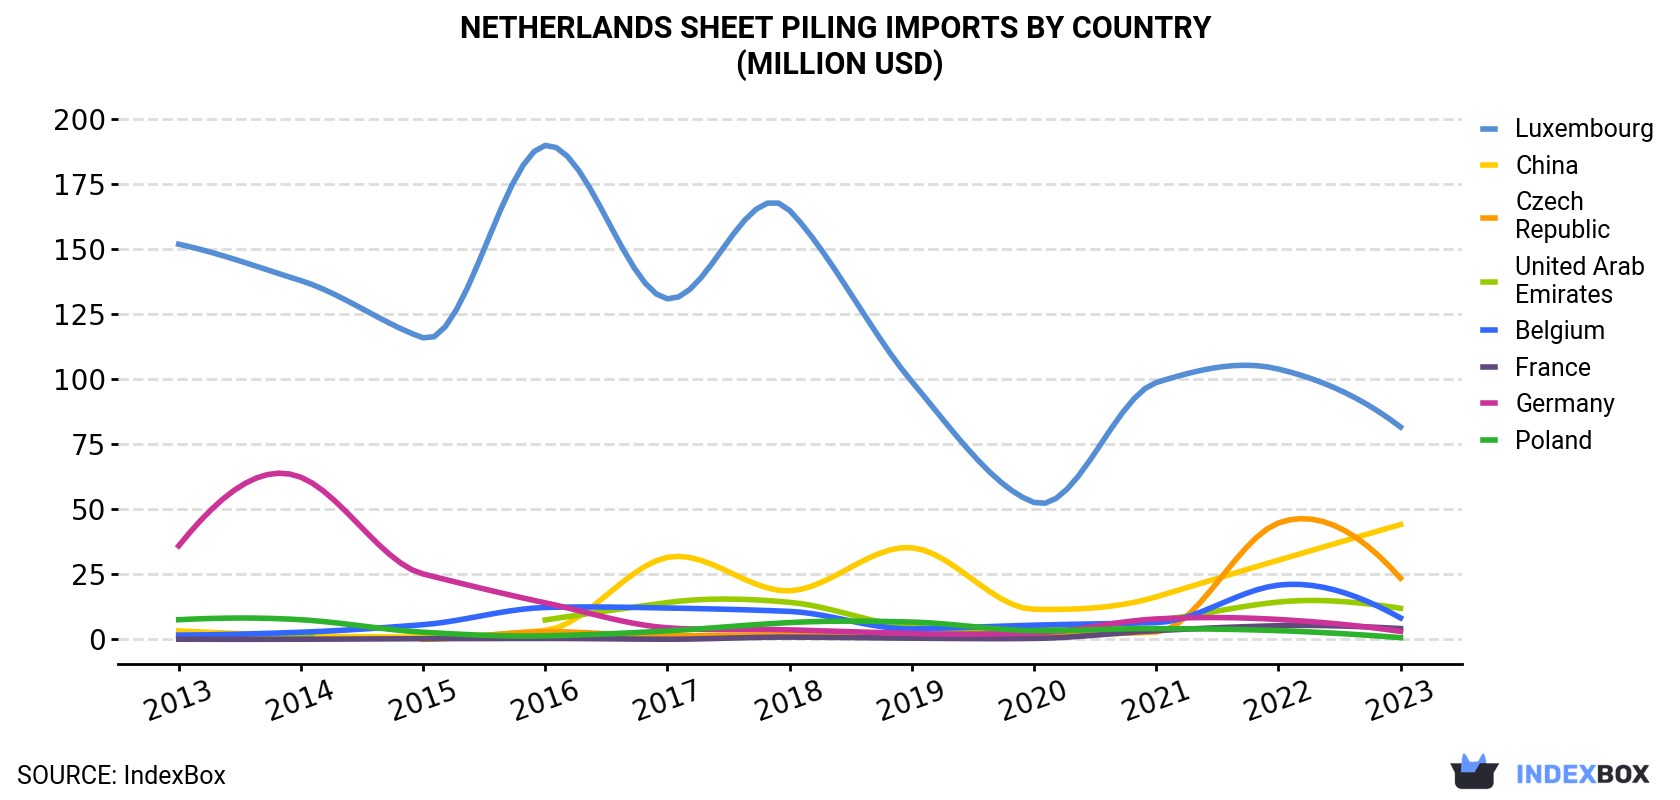 Netherlands Sheet Piling Imports By Country (Million USD)